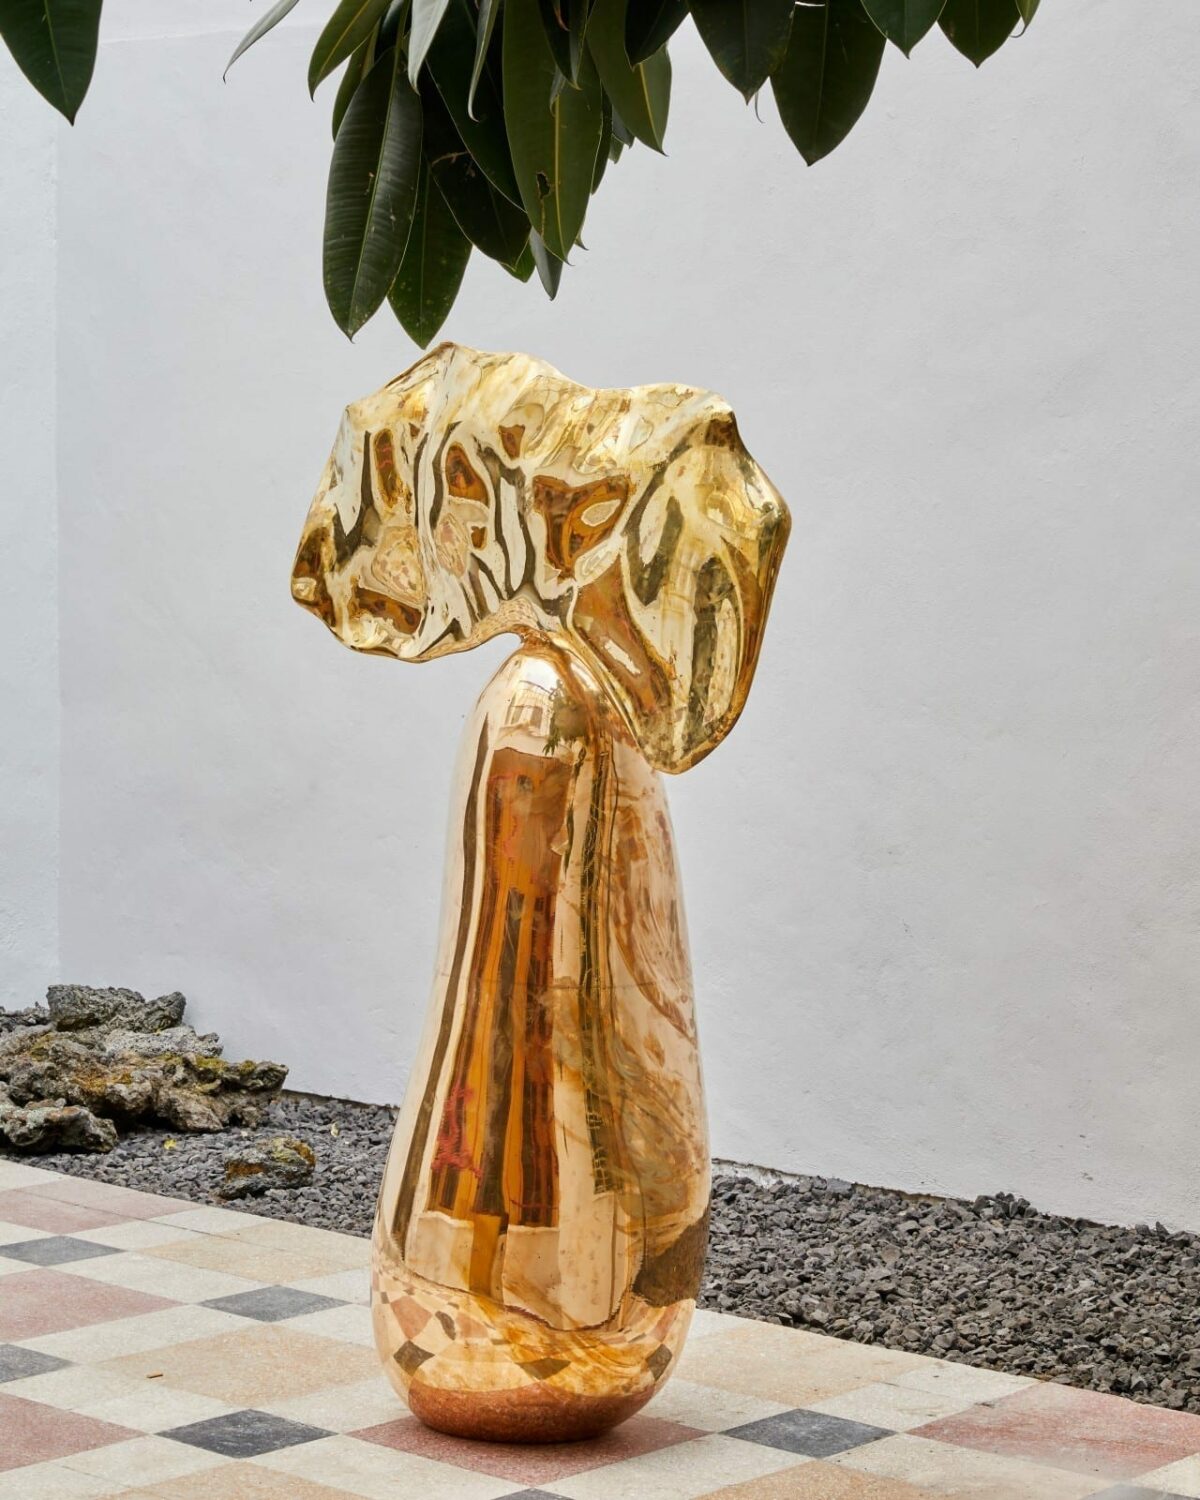 Alma Allen, Not Yet Titled, 2018, bronze, 65 3/8 x 23 5/8 x 23 5/8 inches, 166 x 60 x 60 cm. Photography by Daniel Kent. Courtesy of the artist